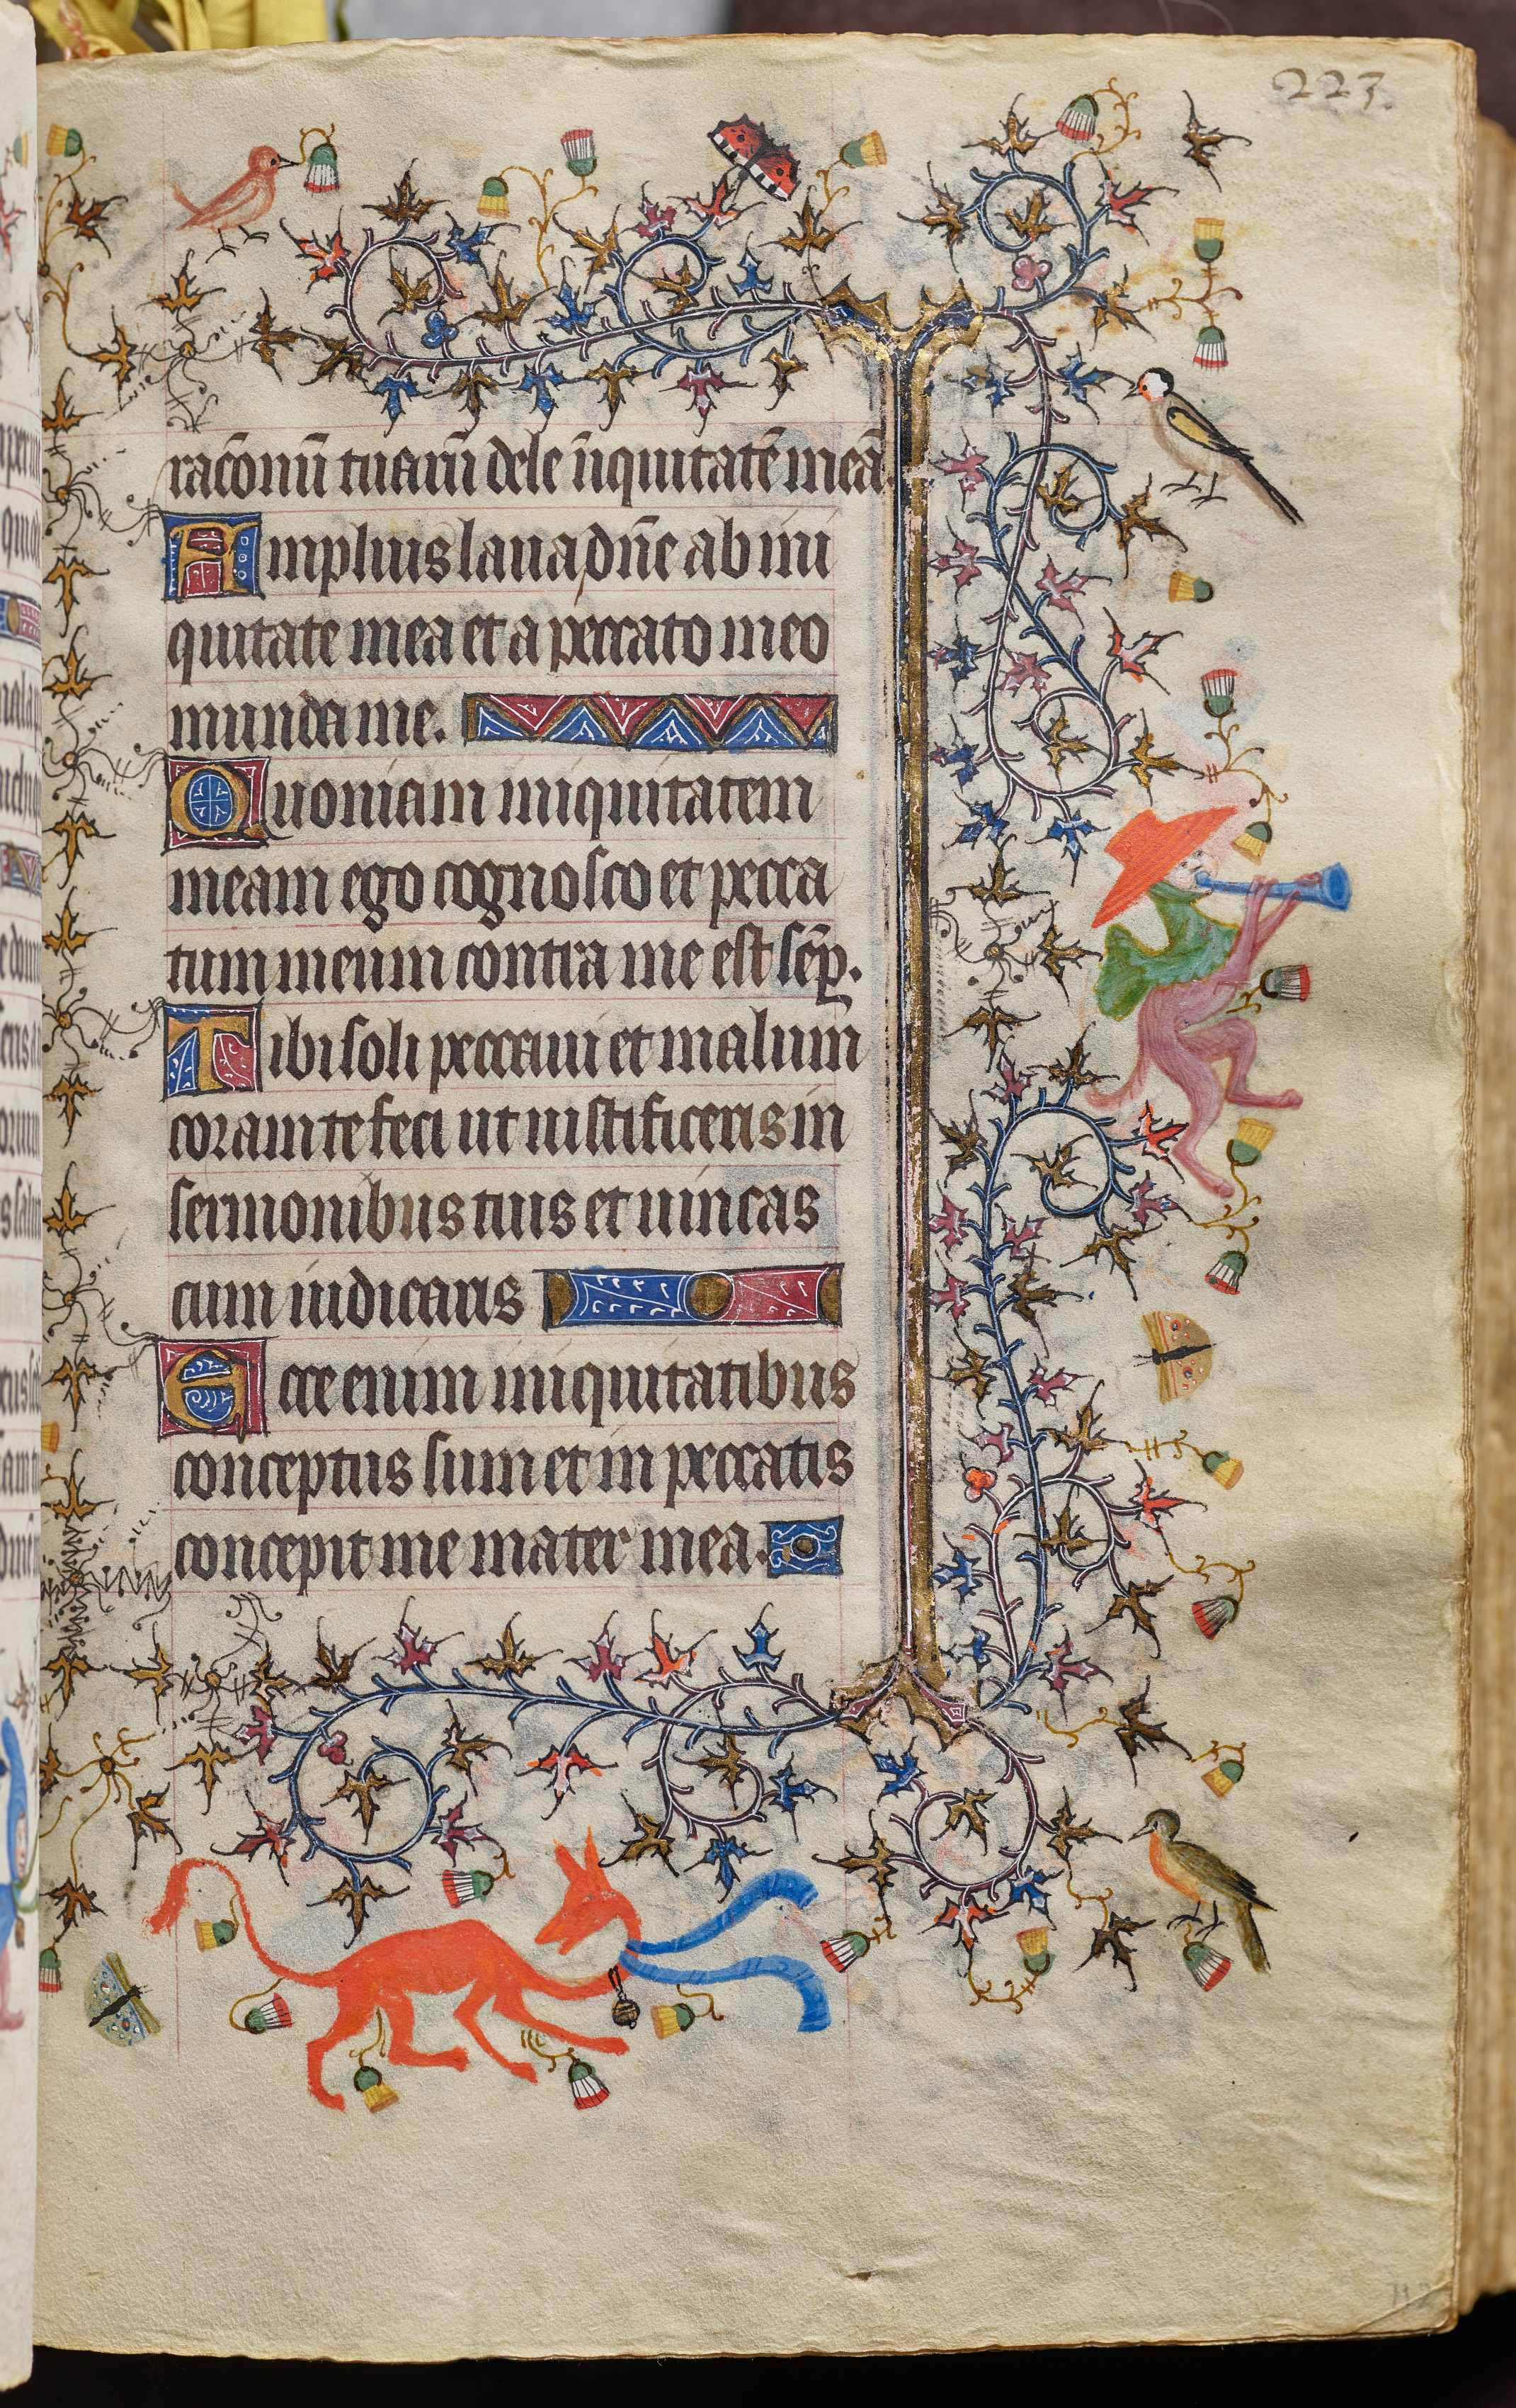 Hours of Charles the Noble, King of Navarre (1361-1425): fol. 112r, Text